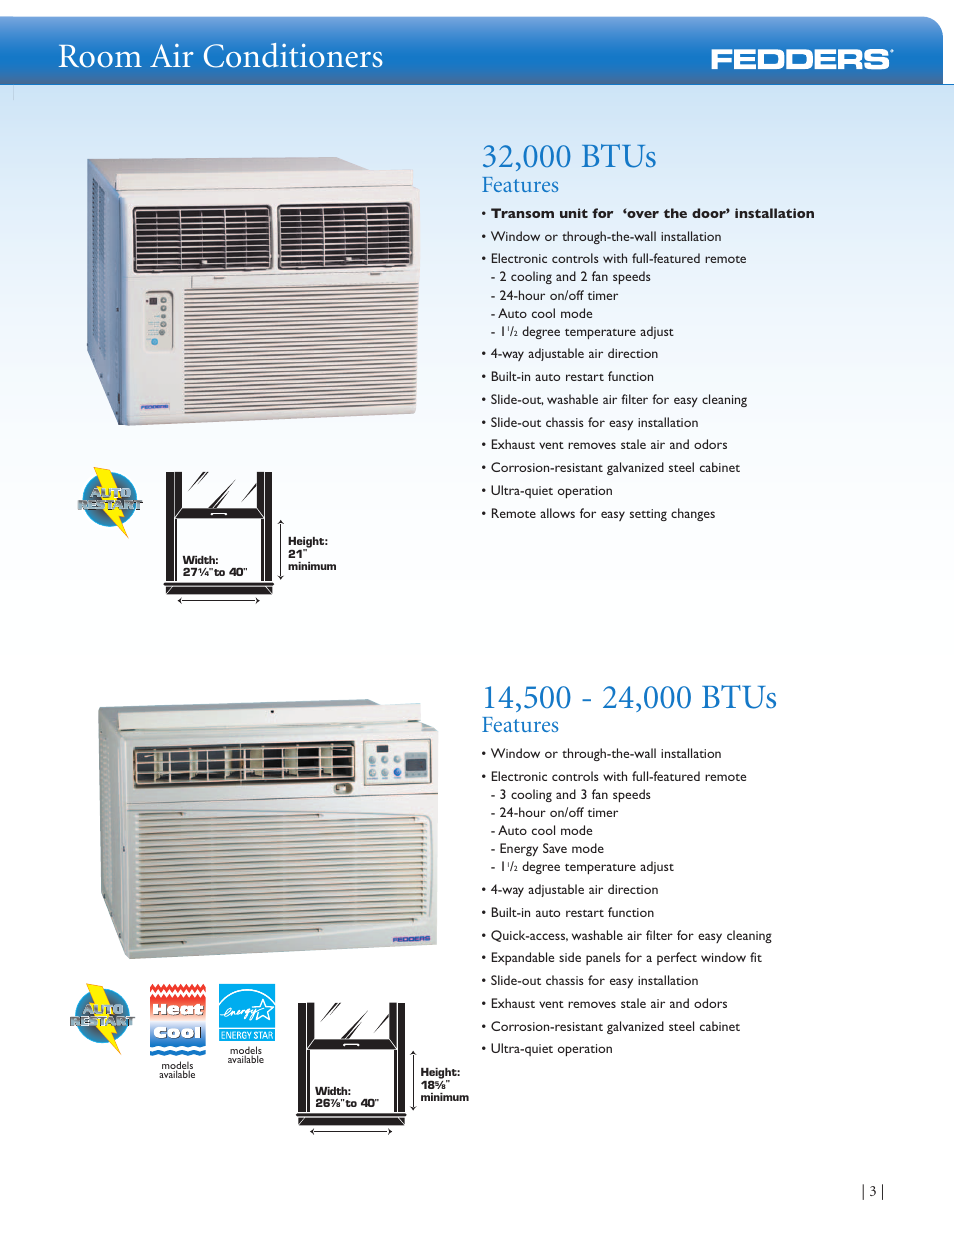 Room Air Conditioners Features Fedders Room Air Conditioners User Manual Page 3 8